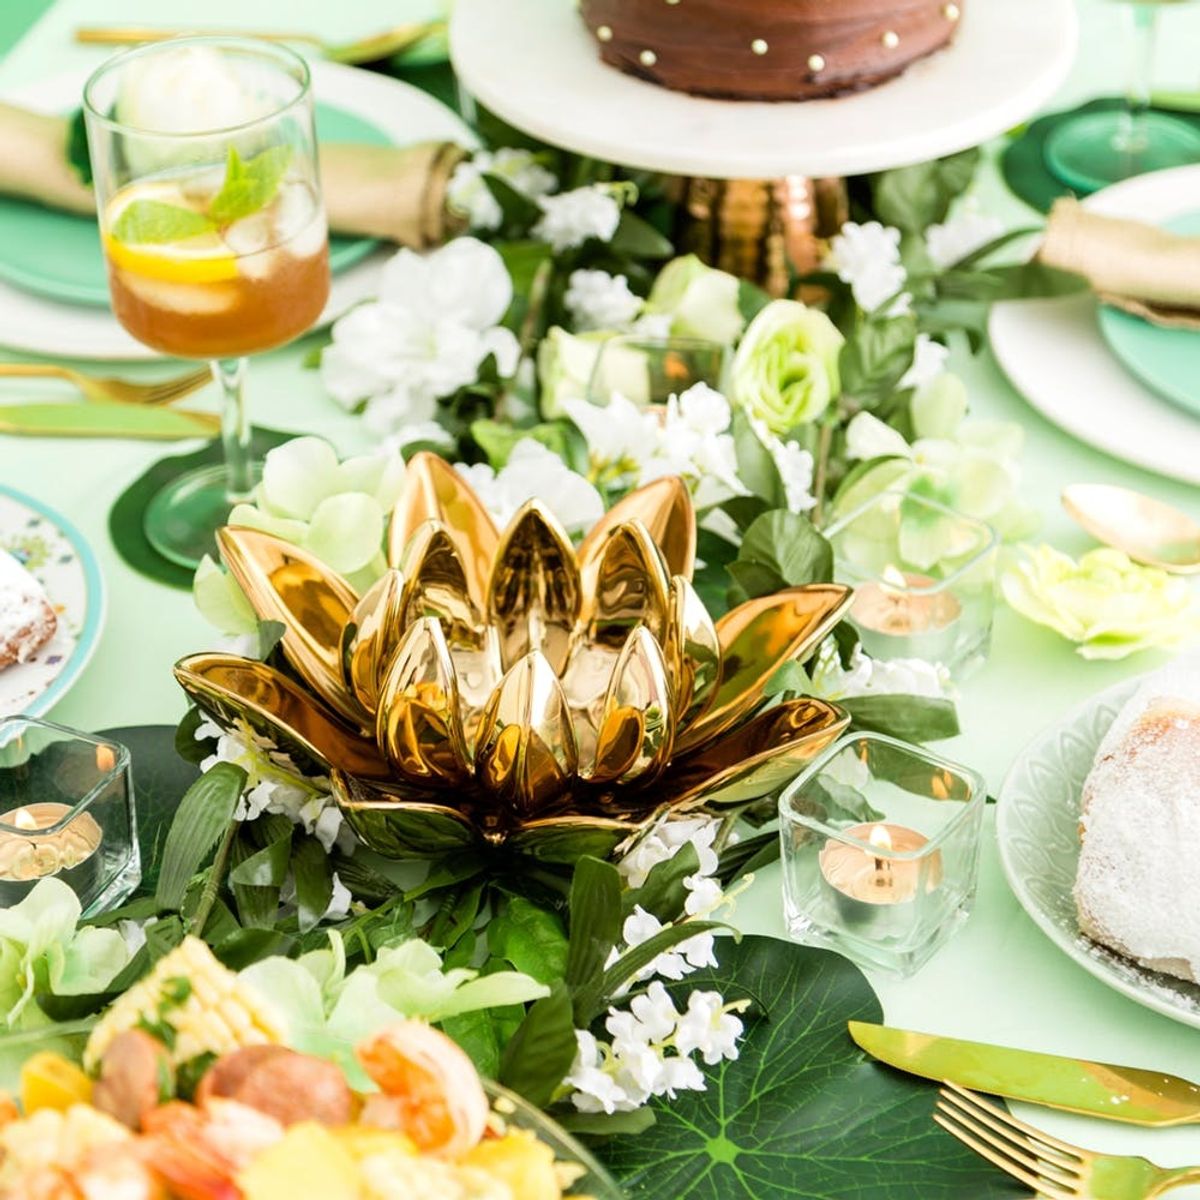 Bring Princess and the Frog to Life With This Tiana-Inspired Boozy Brunch